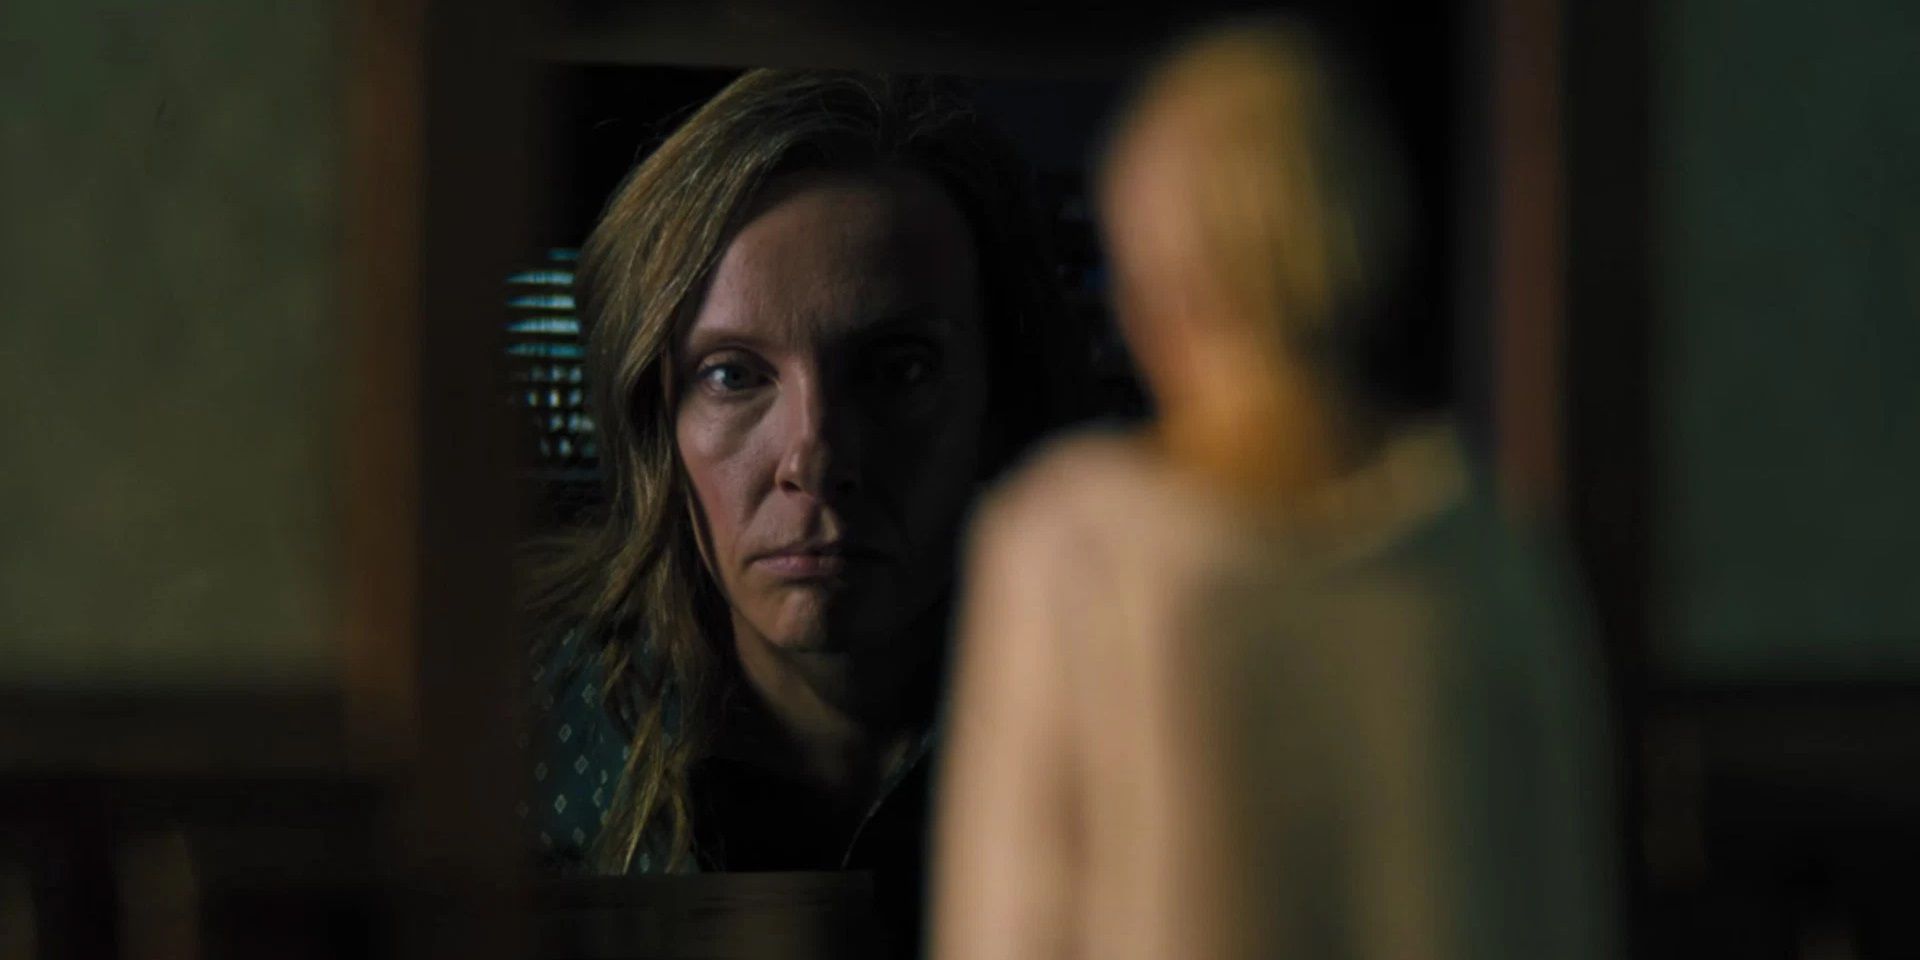 Toni Collette as Annie in Hereditary